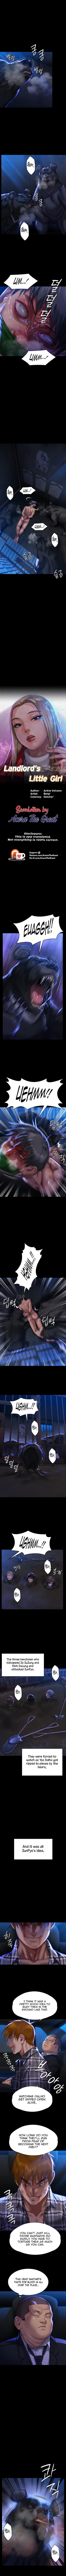 Panel Image 1 for chapter 313 of manhwa Queen Bee on read.oppai.stream